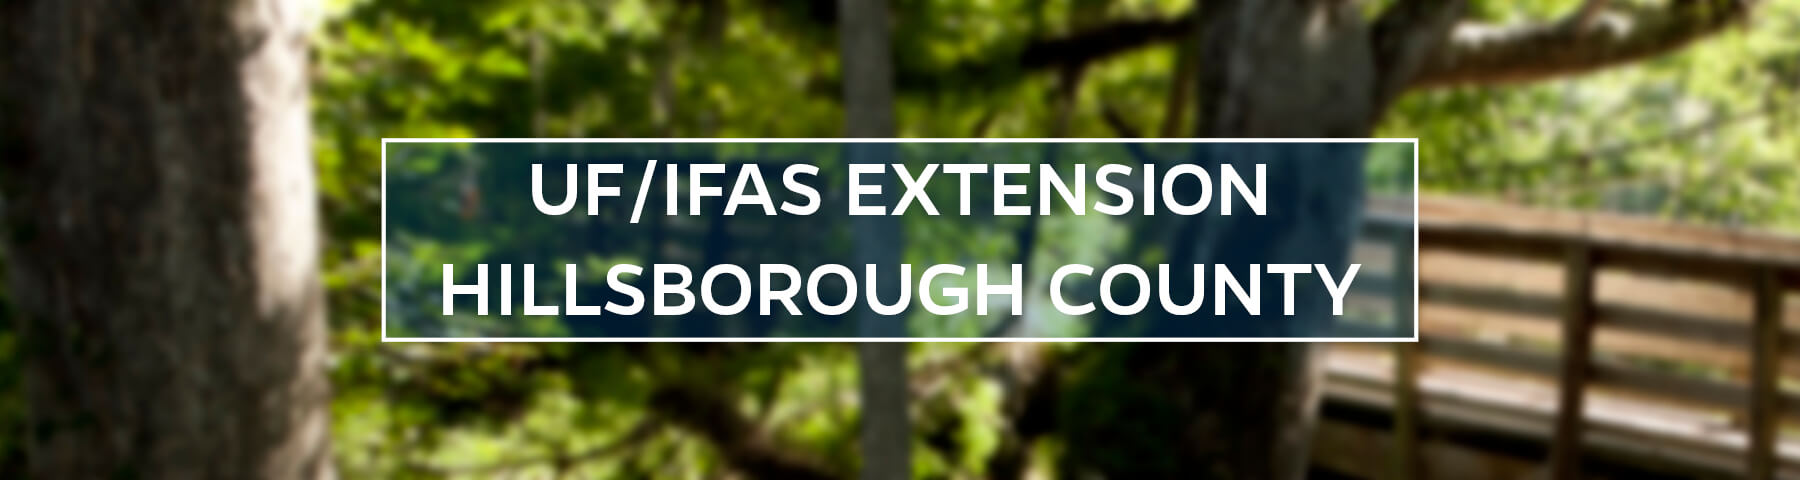 UF/IFAS Extension Hillsborough County